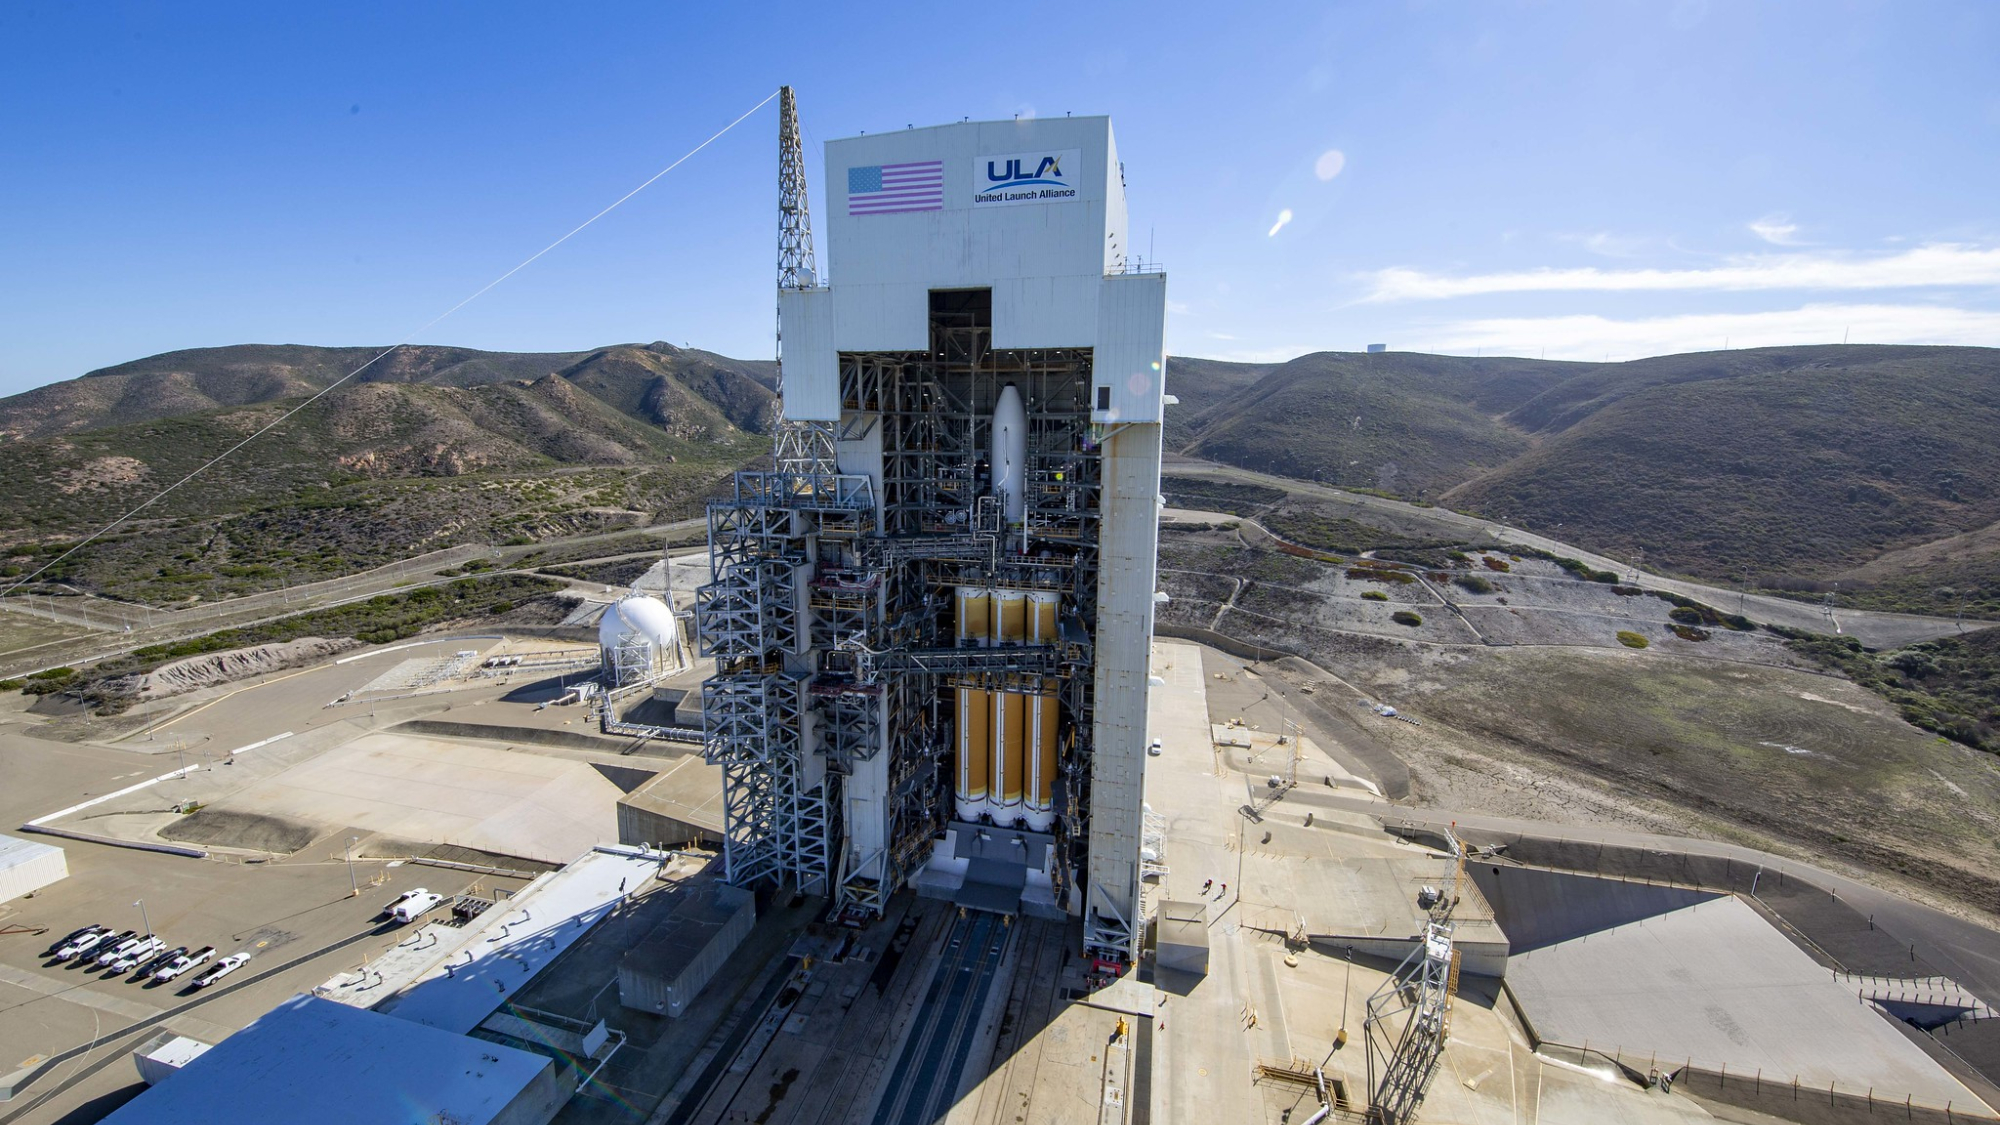 ULA's Next Delta IV Heavy Arrives at Vandenberg Launch Pad for NROL-82  Mission - AmericaSpace